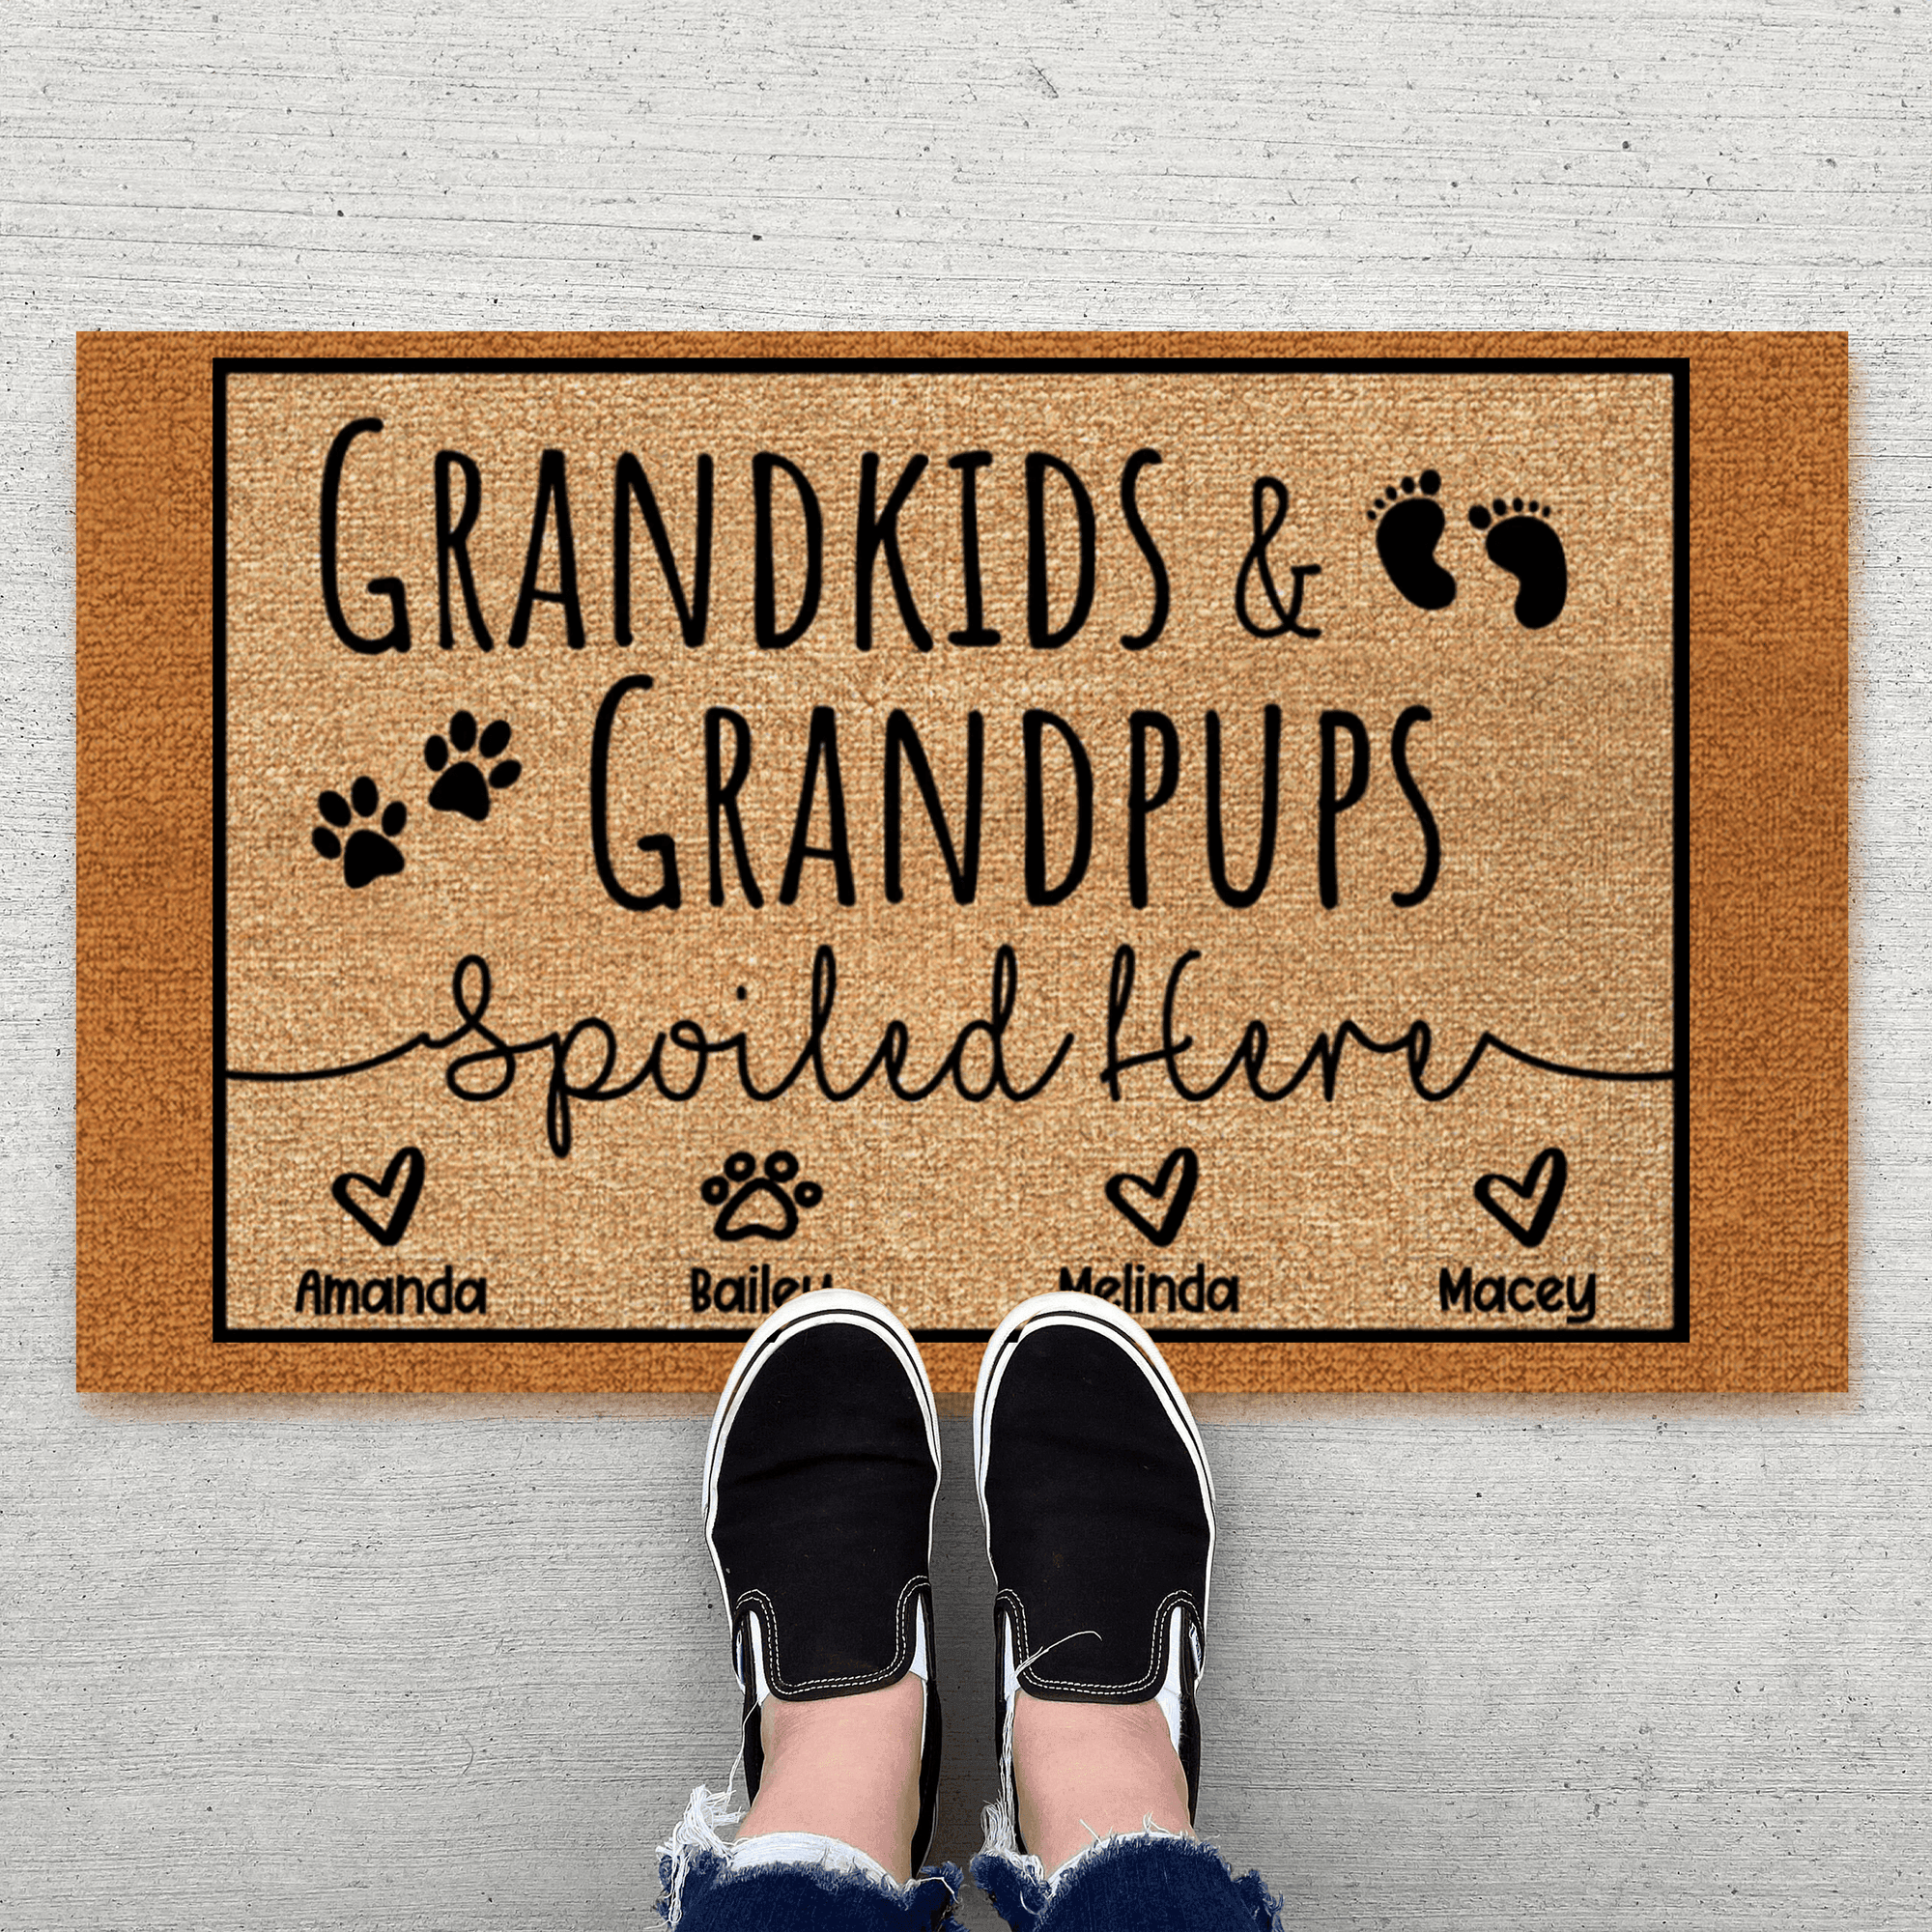 Grandkids and Grandpups Spoiled Here - Personalized Doormat - Birthday, Housewarming, Funny Gift for Homeowners, Grandmas, Grandparents, Dog Mom, Dog Dad, Dog Lovers, Pet Gifts - Suzitee Store